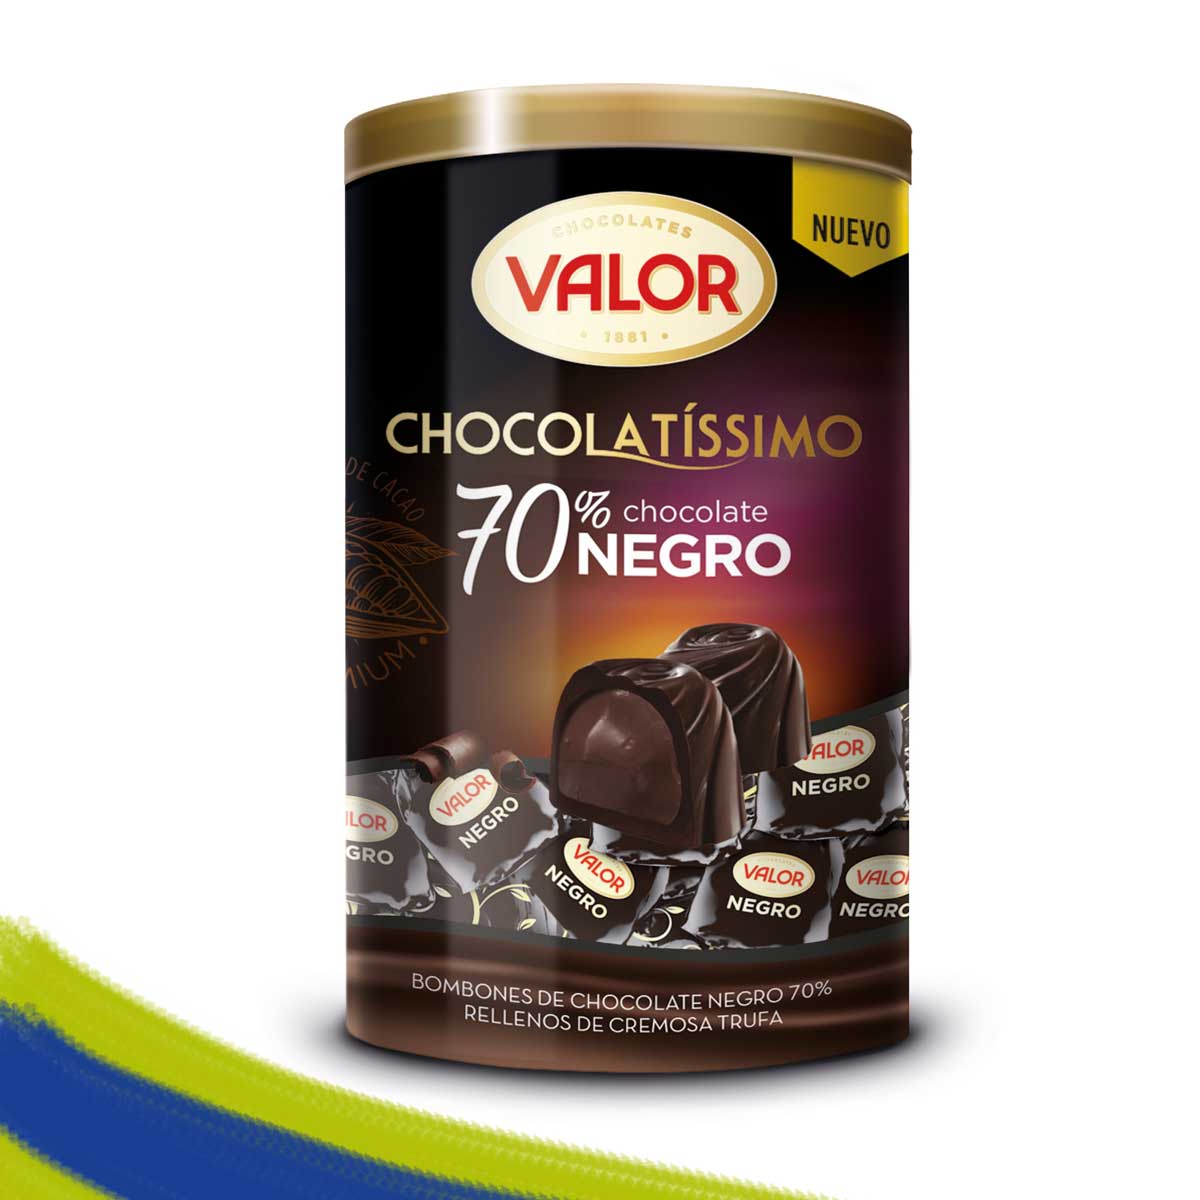 Chocolate soluble Valor